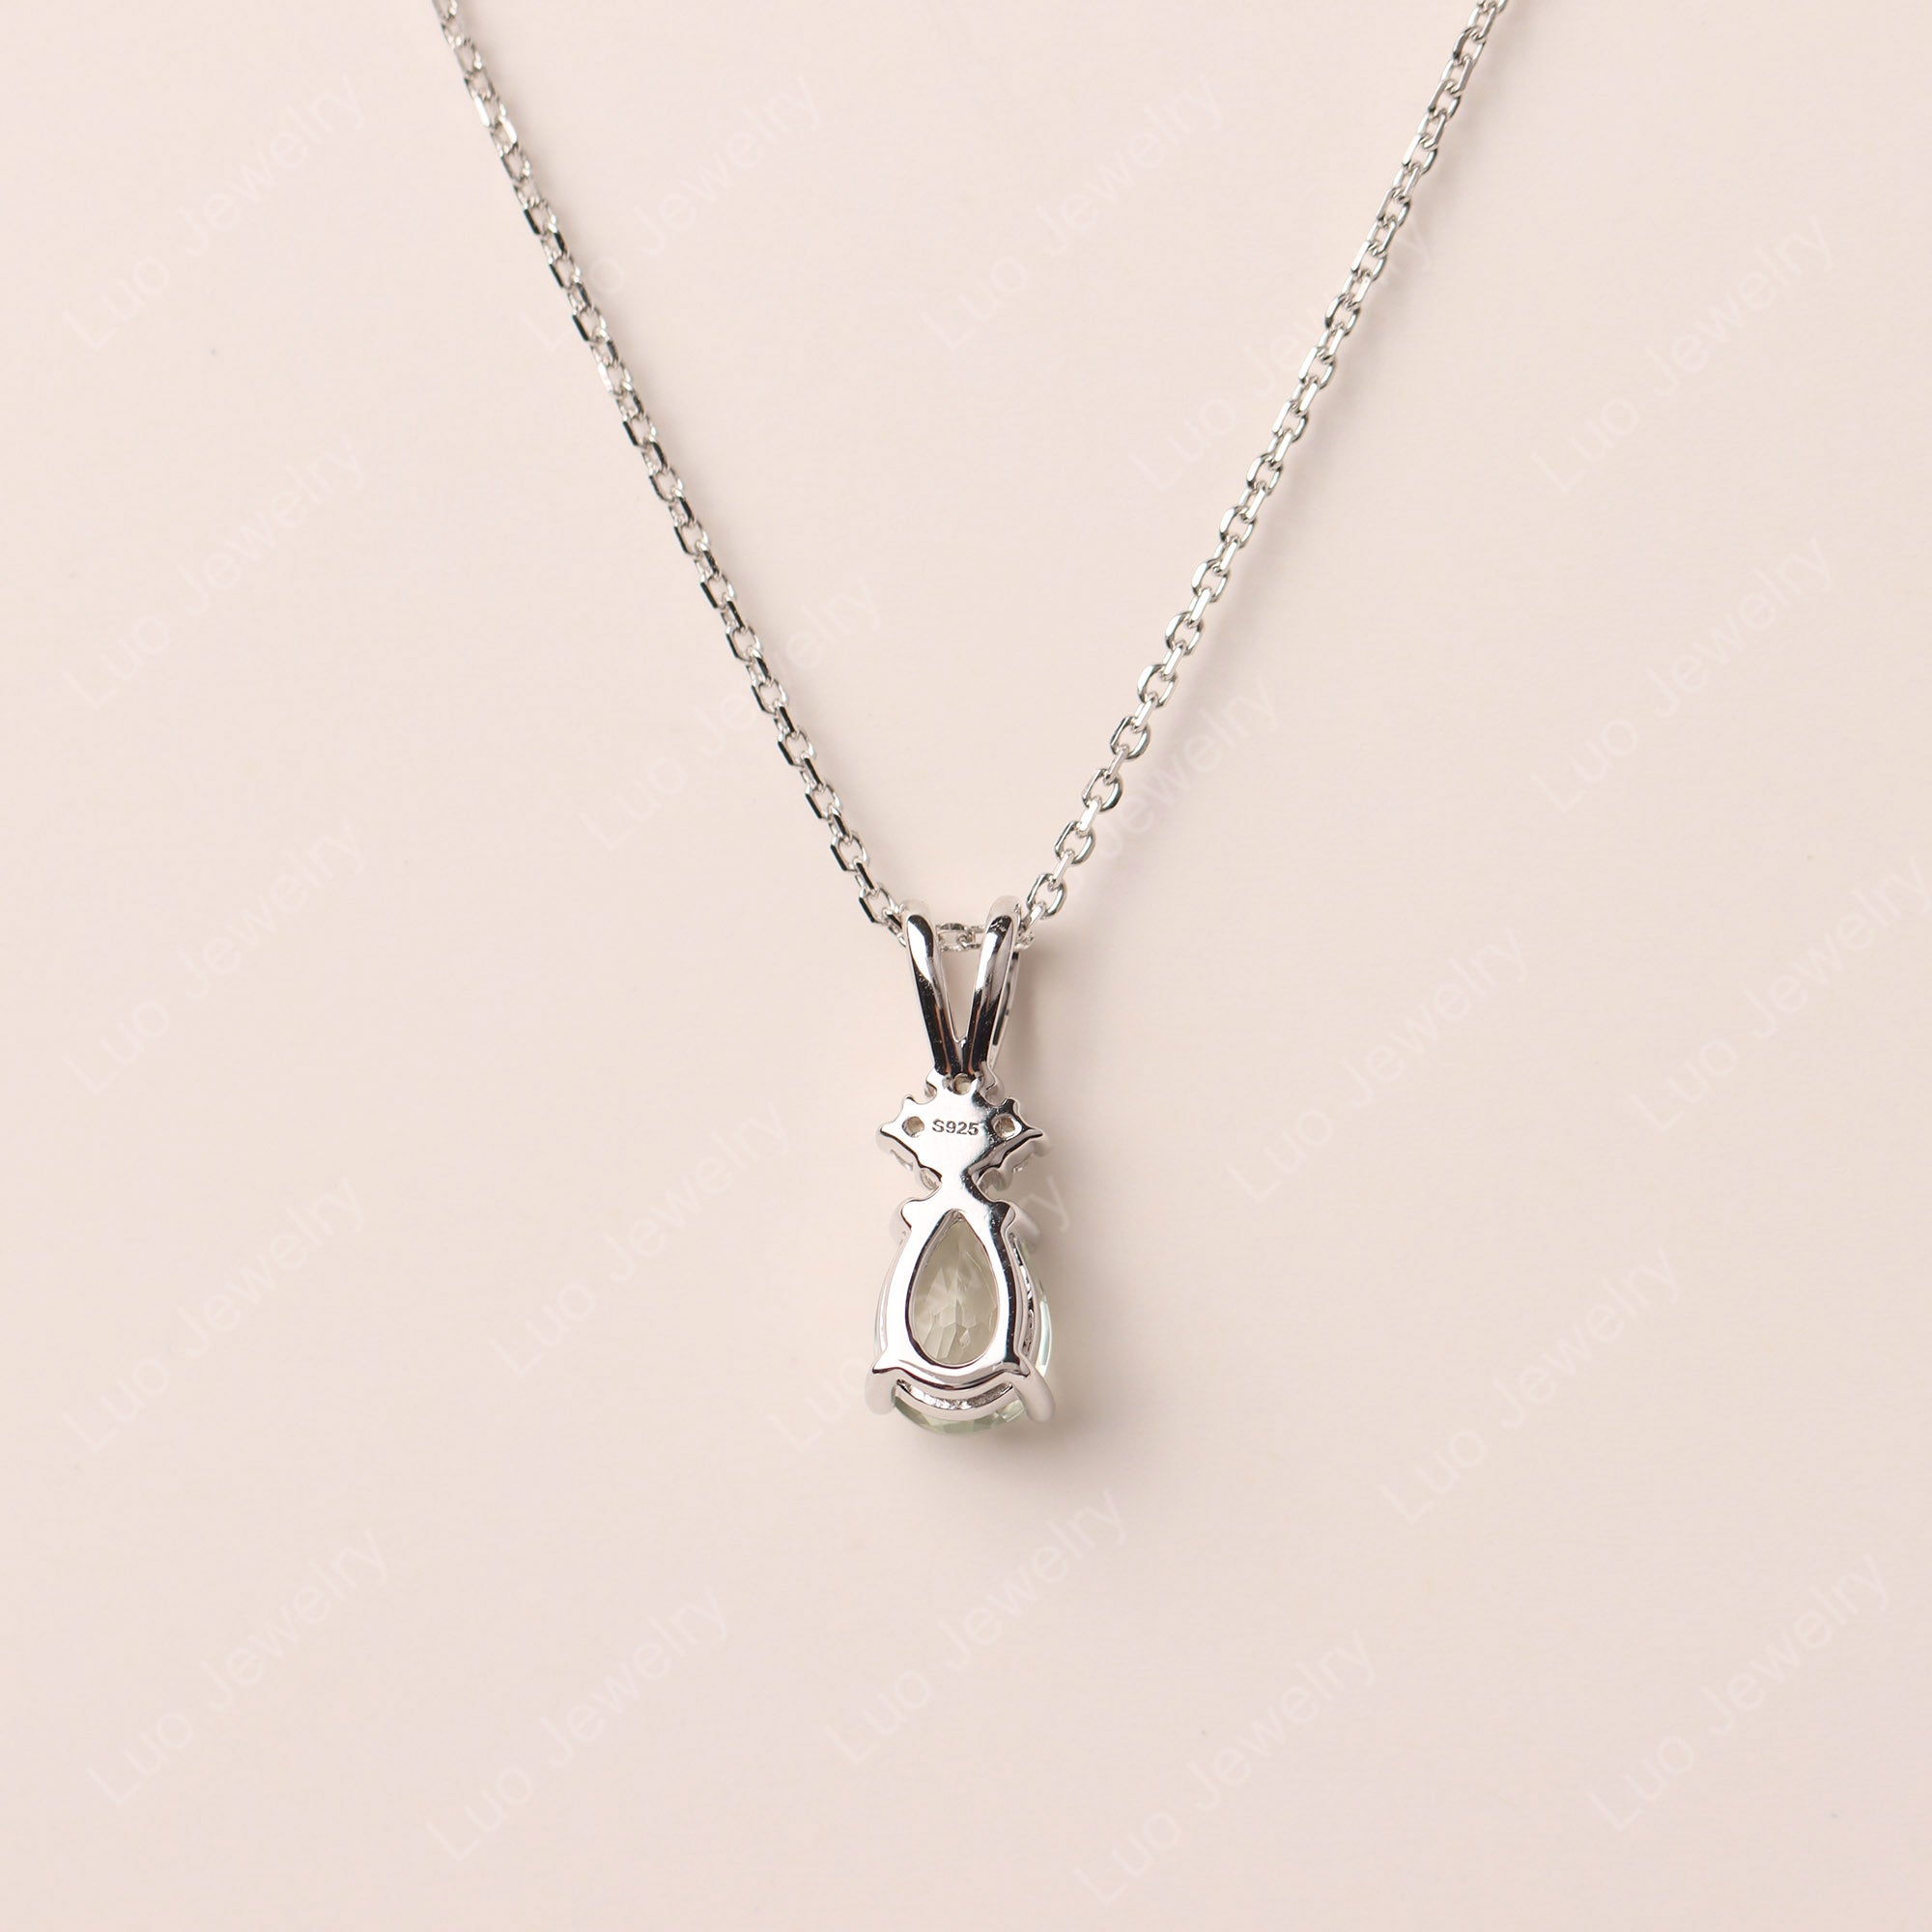 Pear Shaped Green Amethyst Necklace